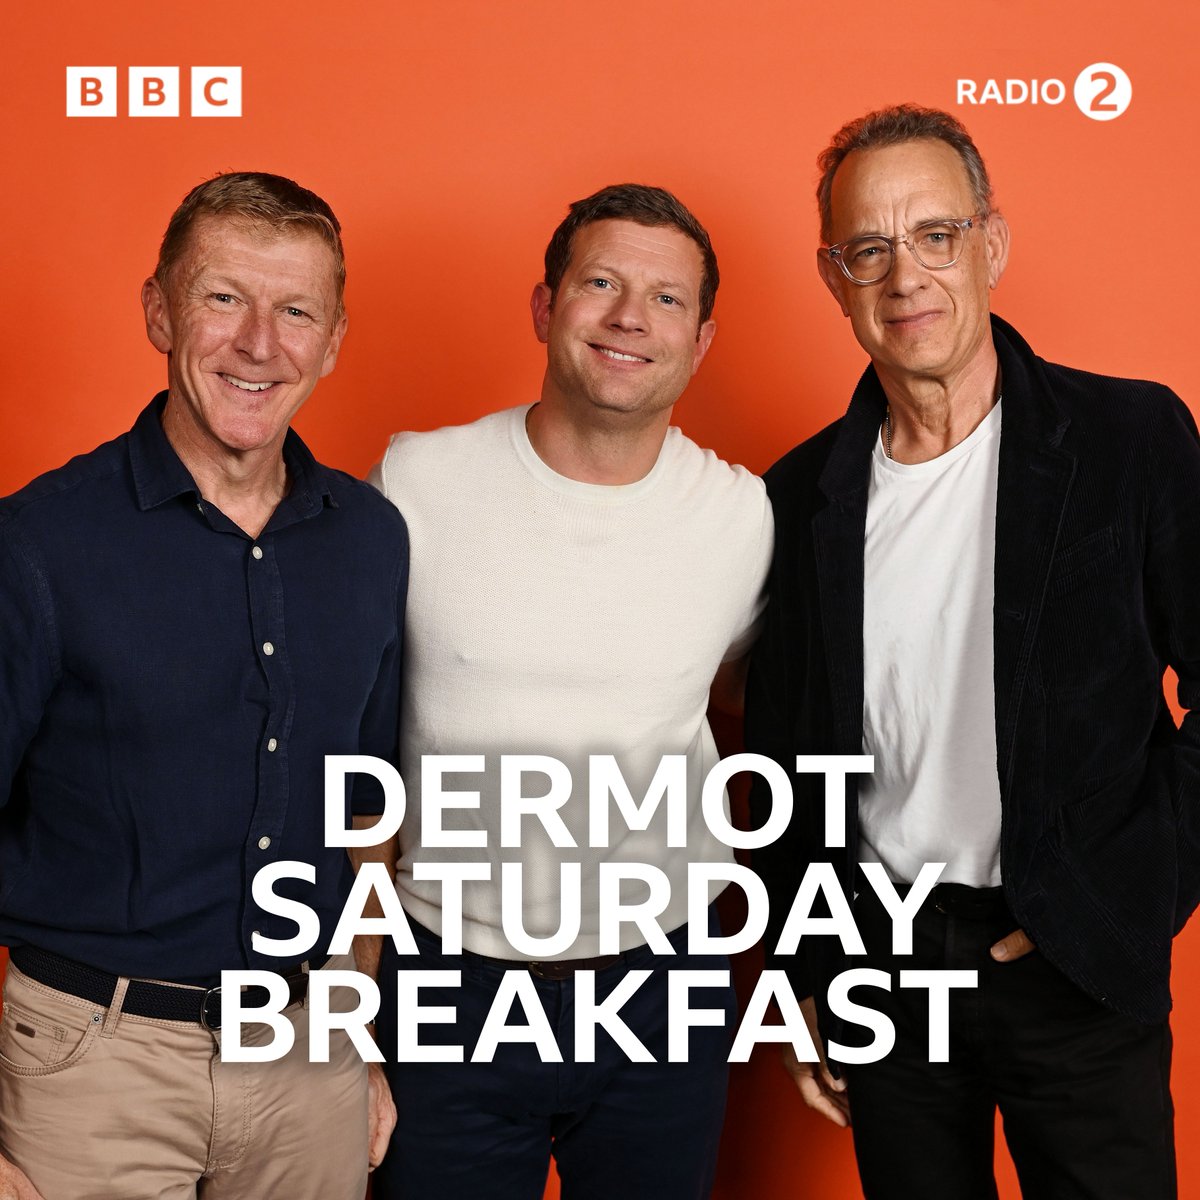 Very special show tomorrow morning - talking all things space with Tom Hanks and Tim Peake. From Tom's training for Apollo 13, to Tim's scientific experiments on the ISS. Join us tomorrow just after 9am. Ask your smart speaker to open BBC Sounds and PLAY RADIO 2